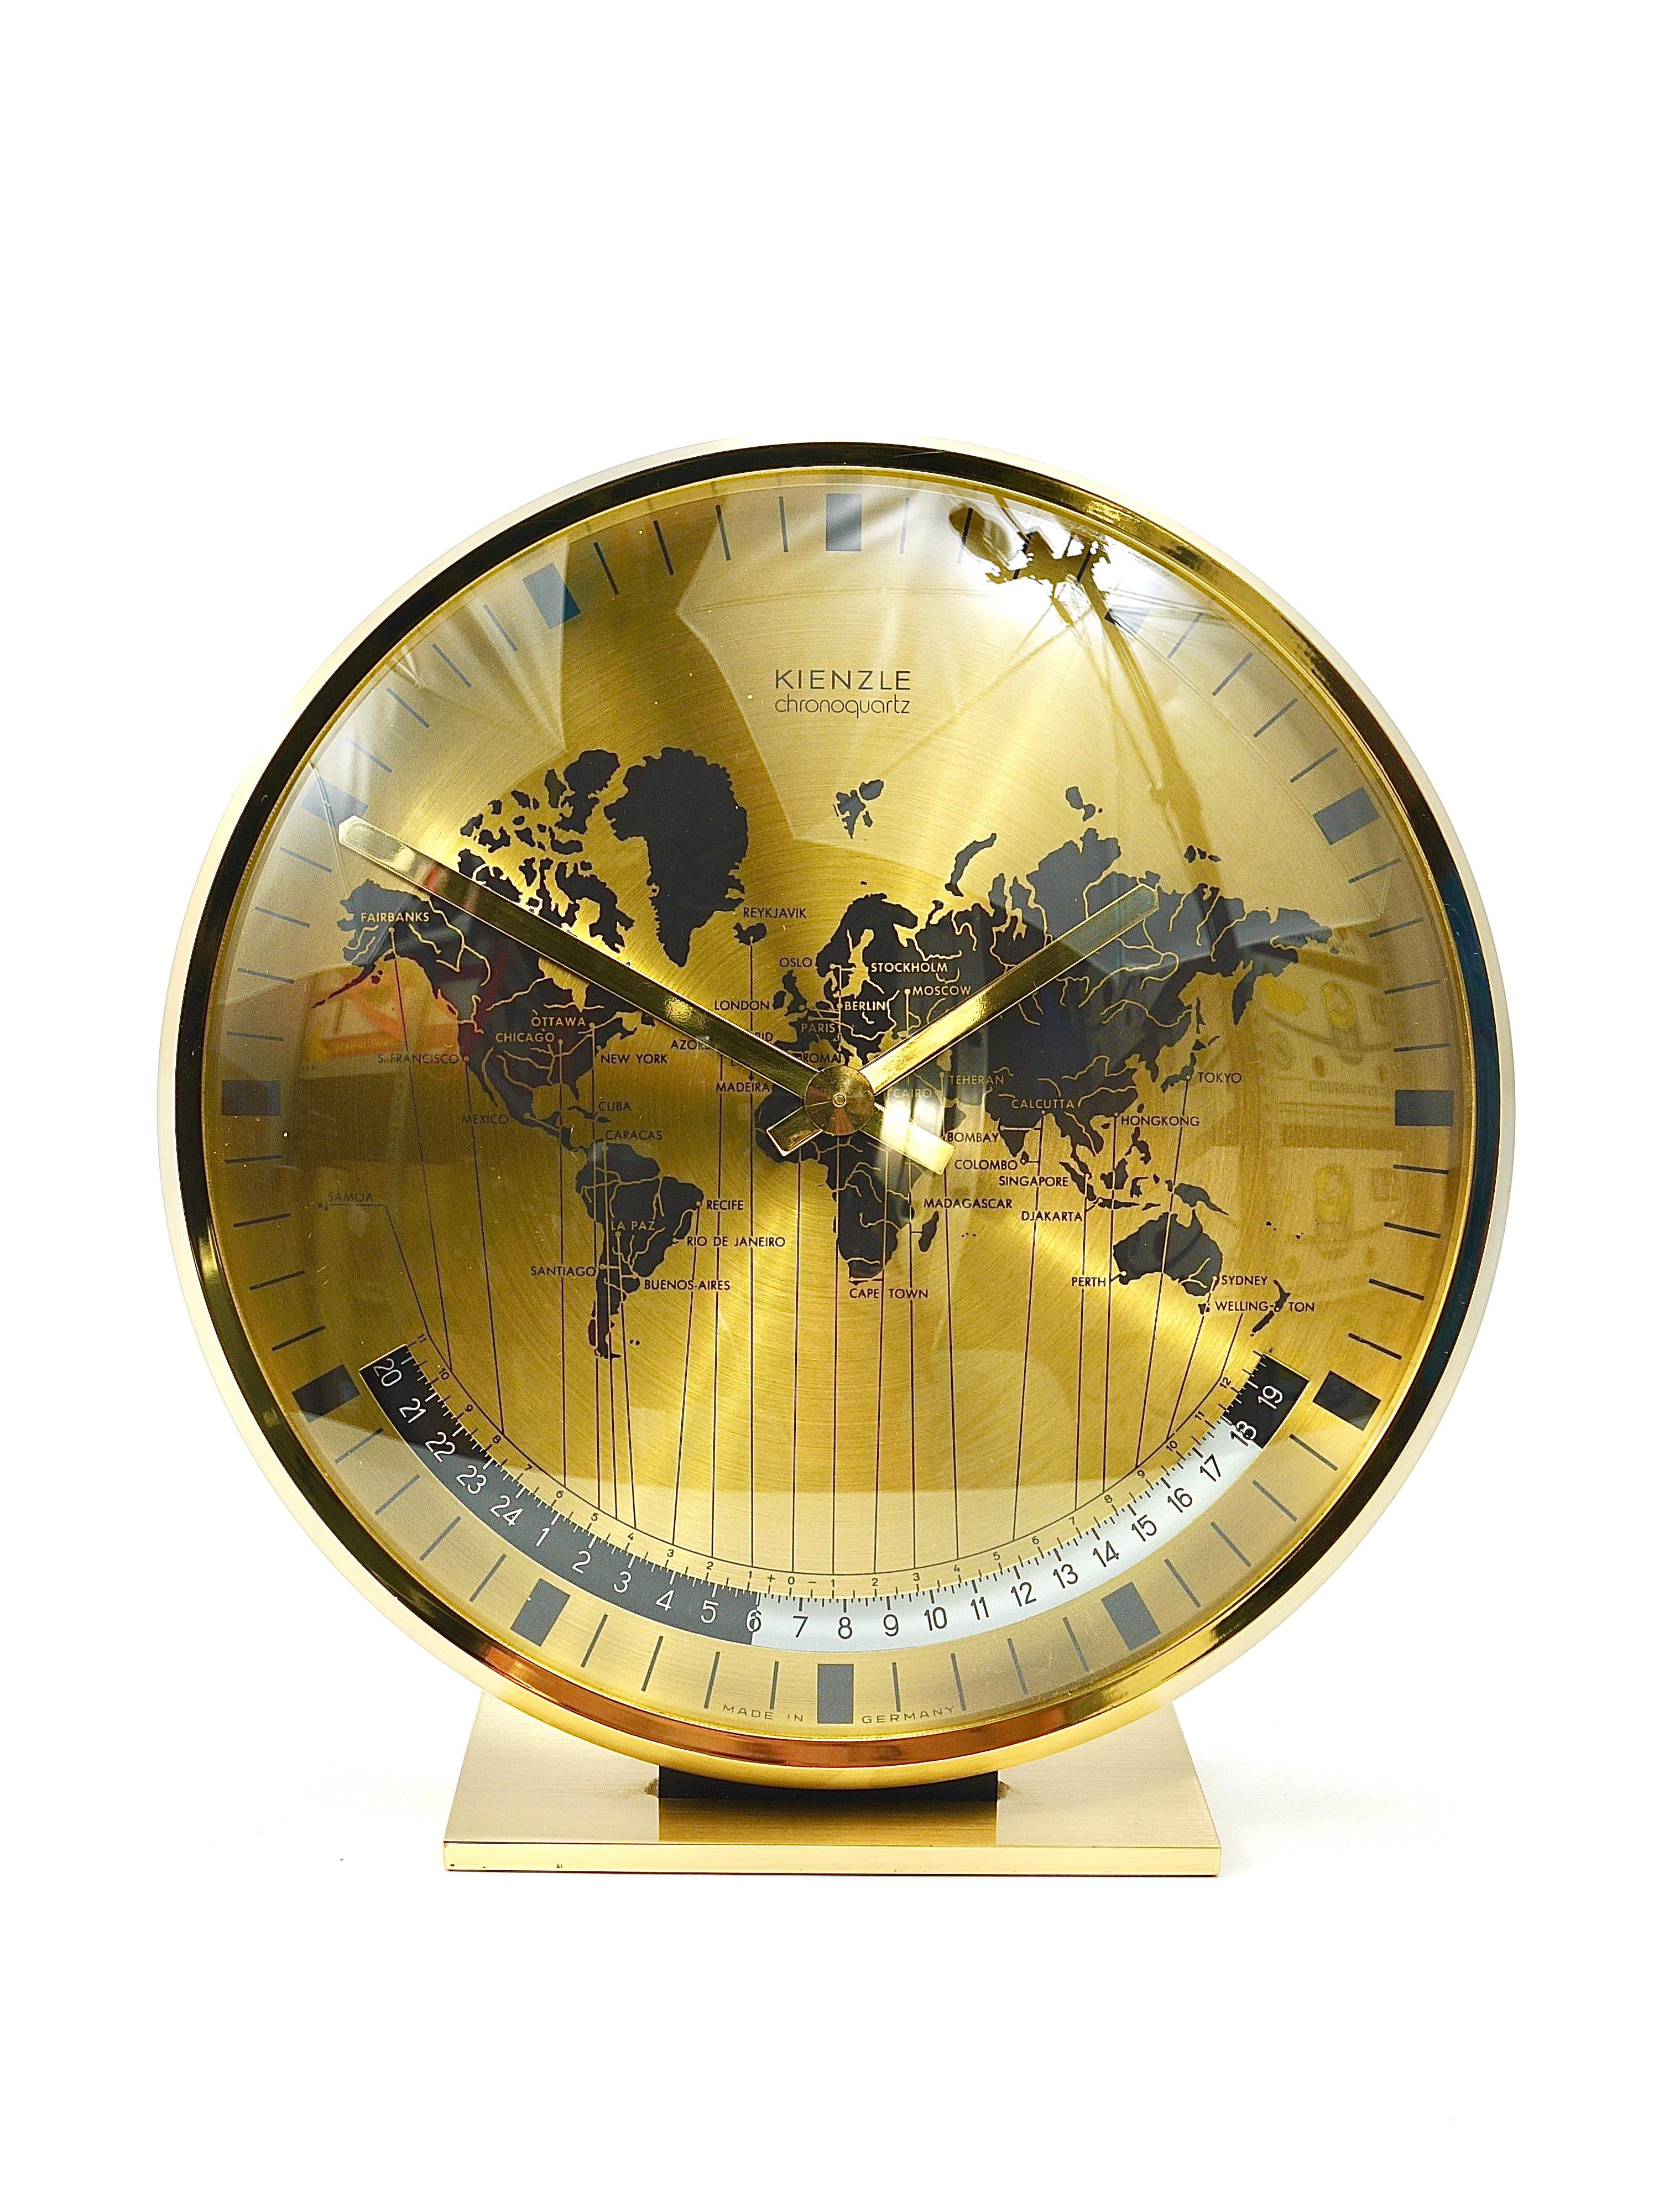 Kienzle GMT World Time Zone Brass Table Clock, Midcentury, Germany, 1960s In Good Condition For Sale In Vienna, AT